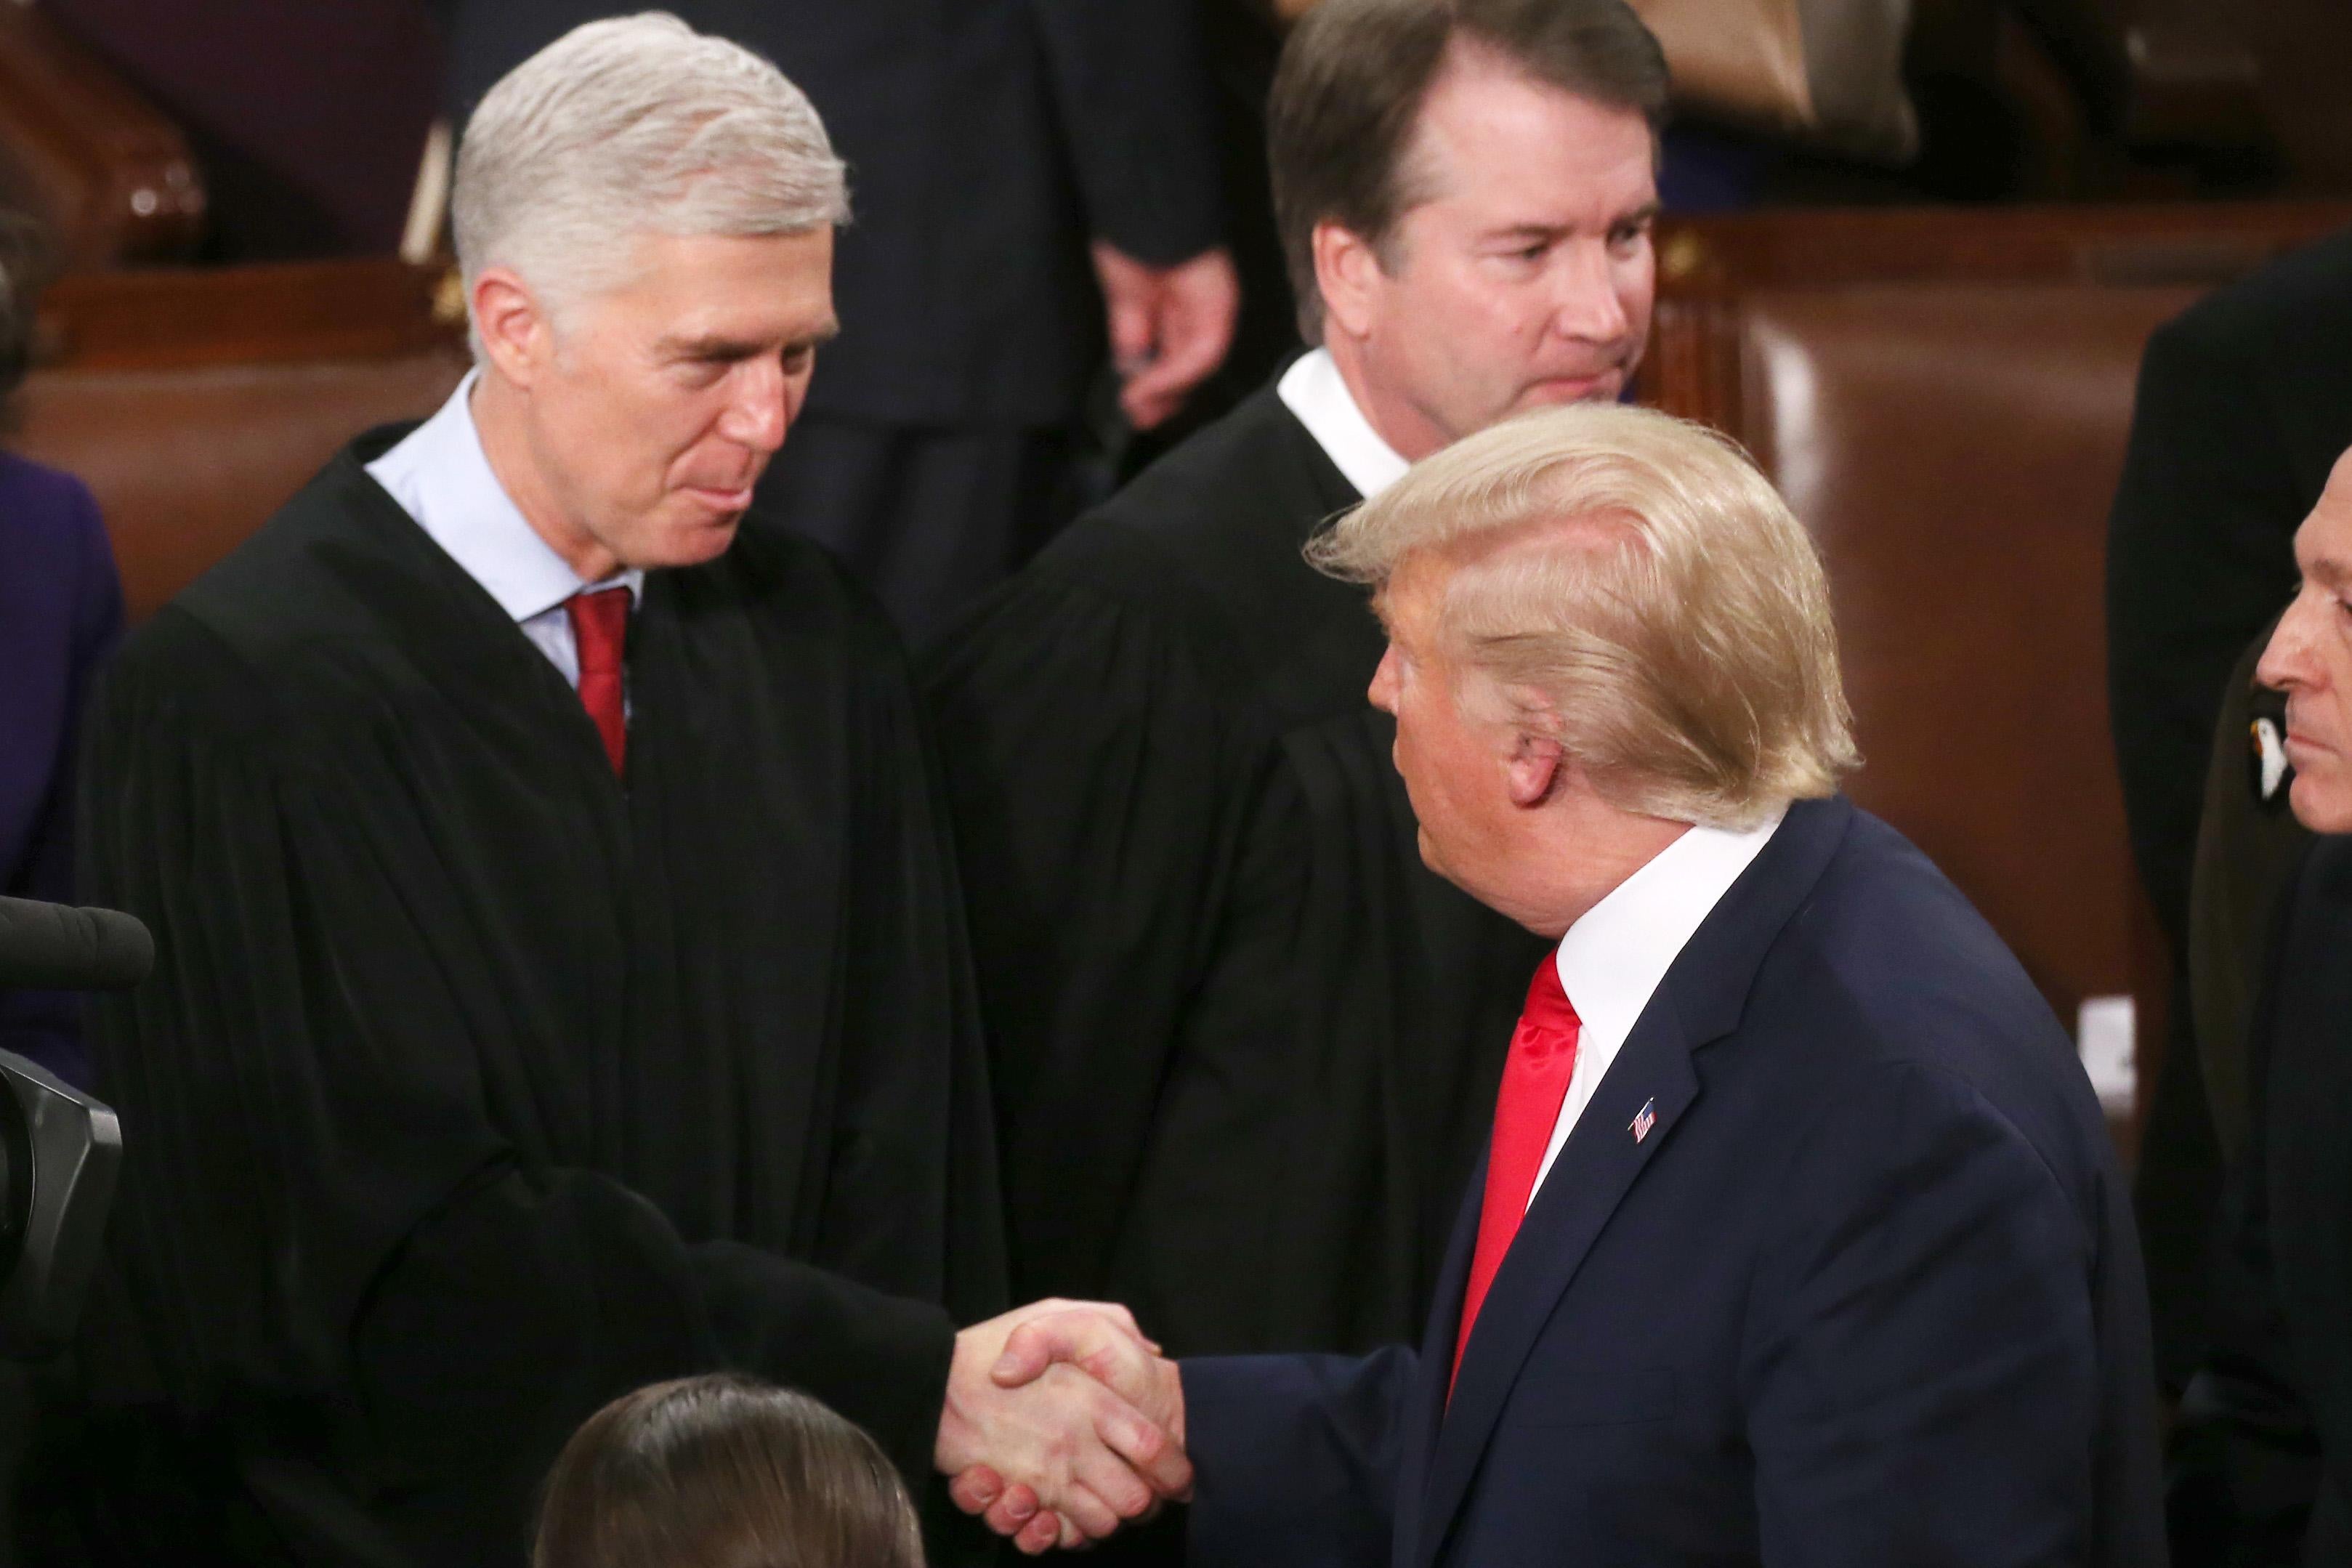 Gorsuch with a big grin shaking Trump's hand. Kavanaugh standing nearby.